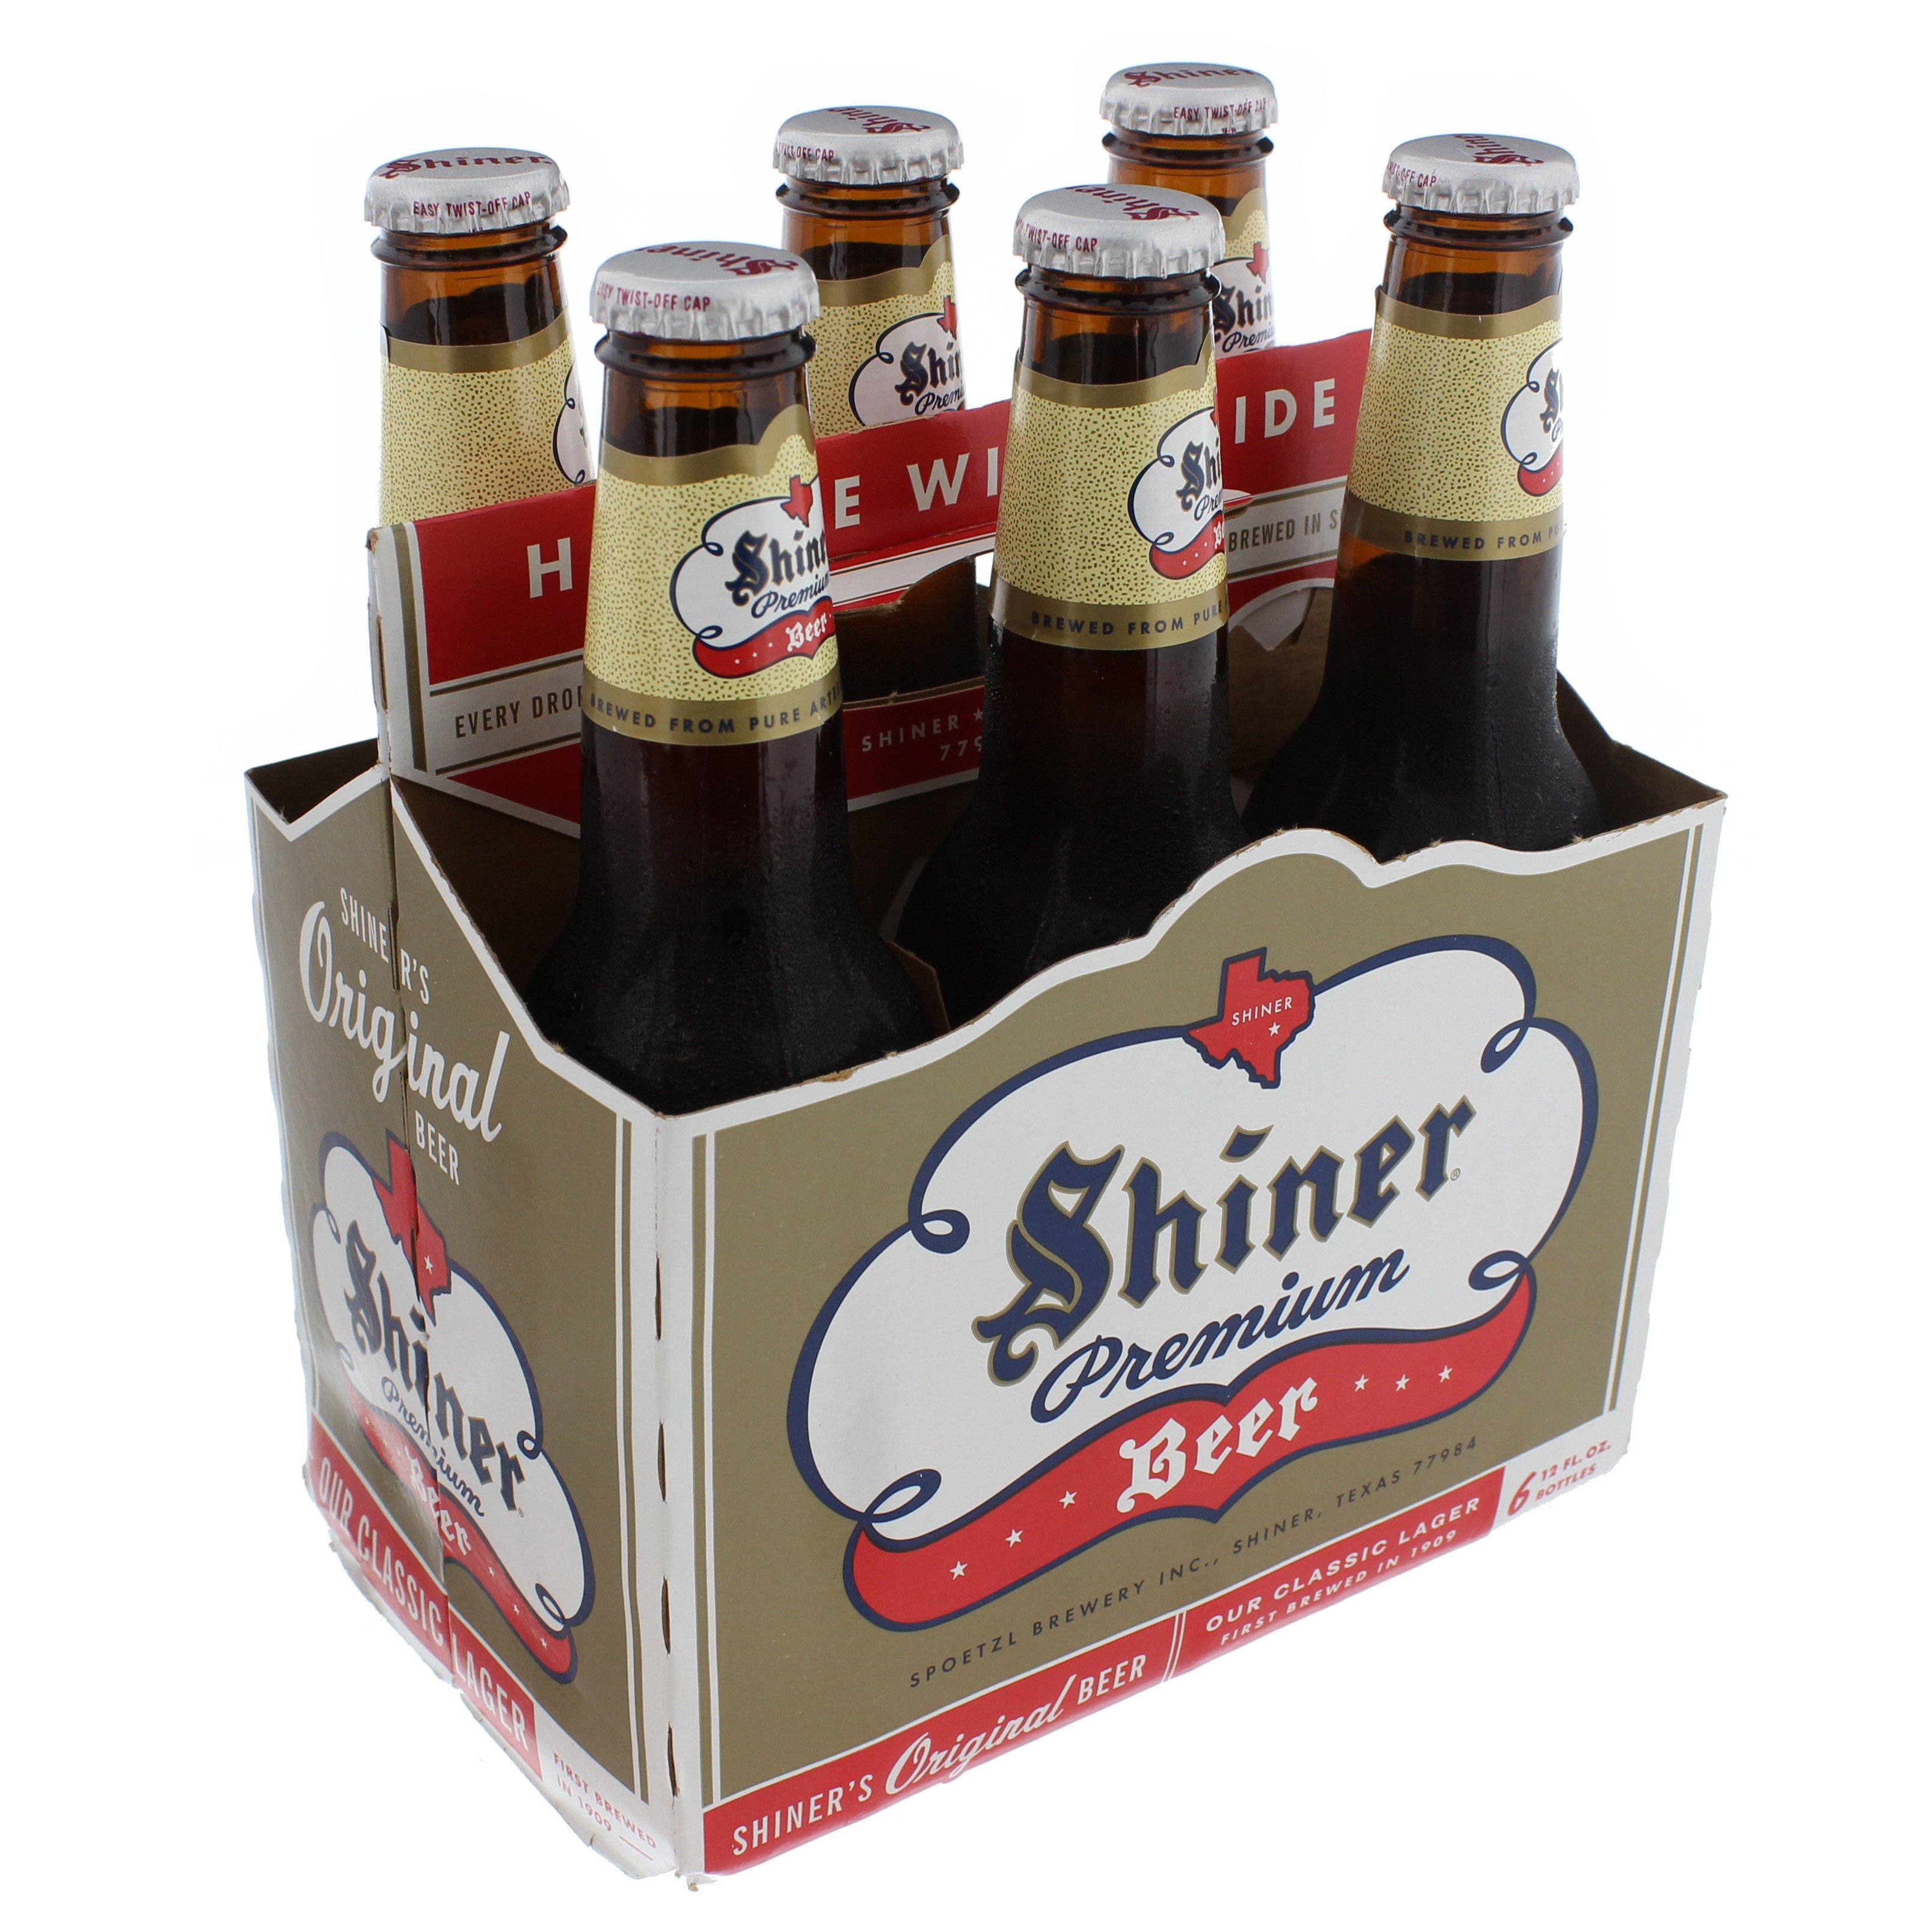 Collectible SHINER PREMIUM Beer Bottle Classic Throwback Spoetzl Brewery 